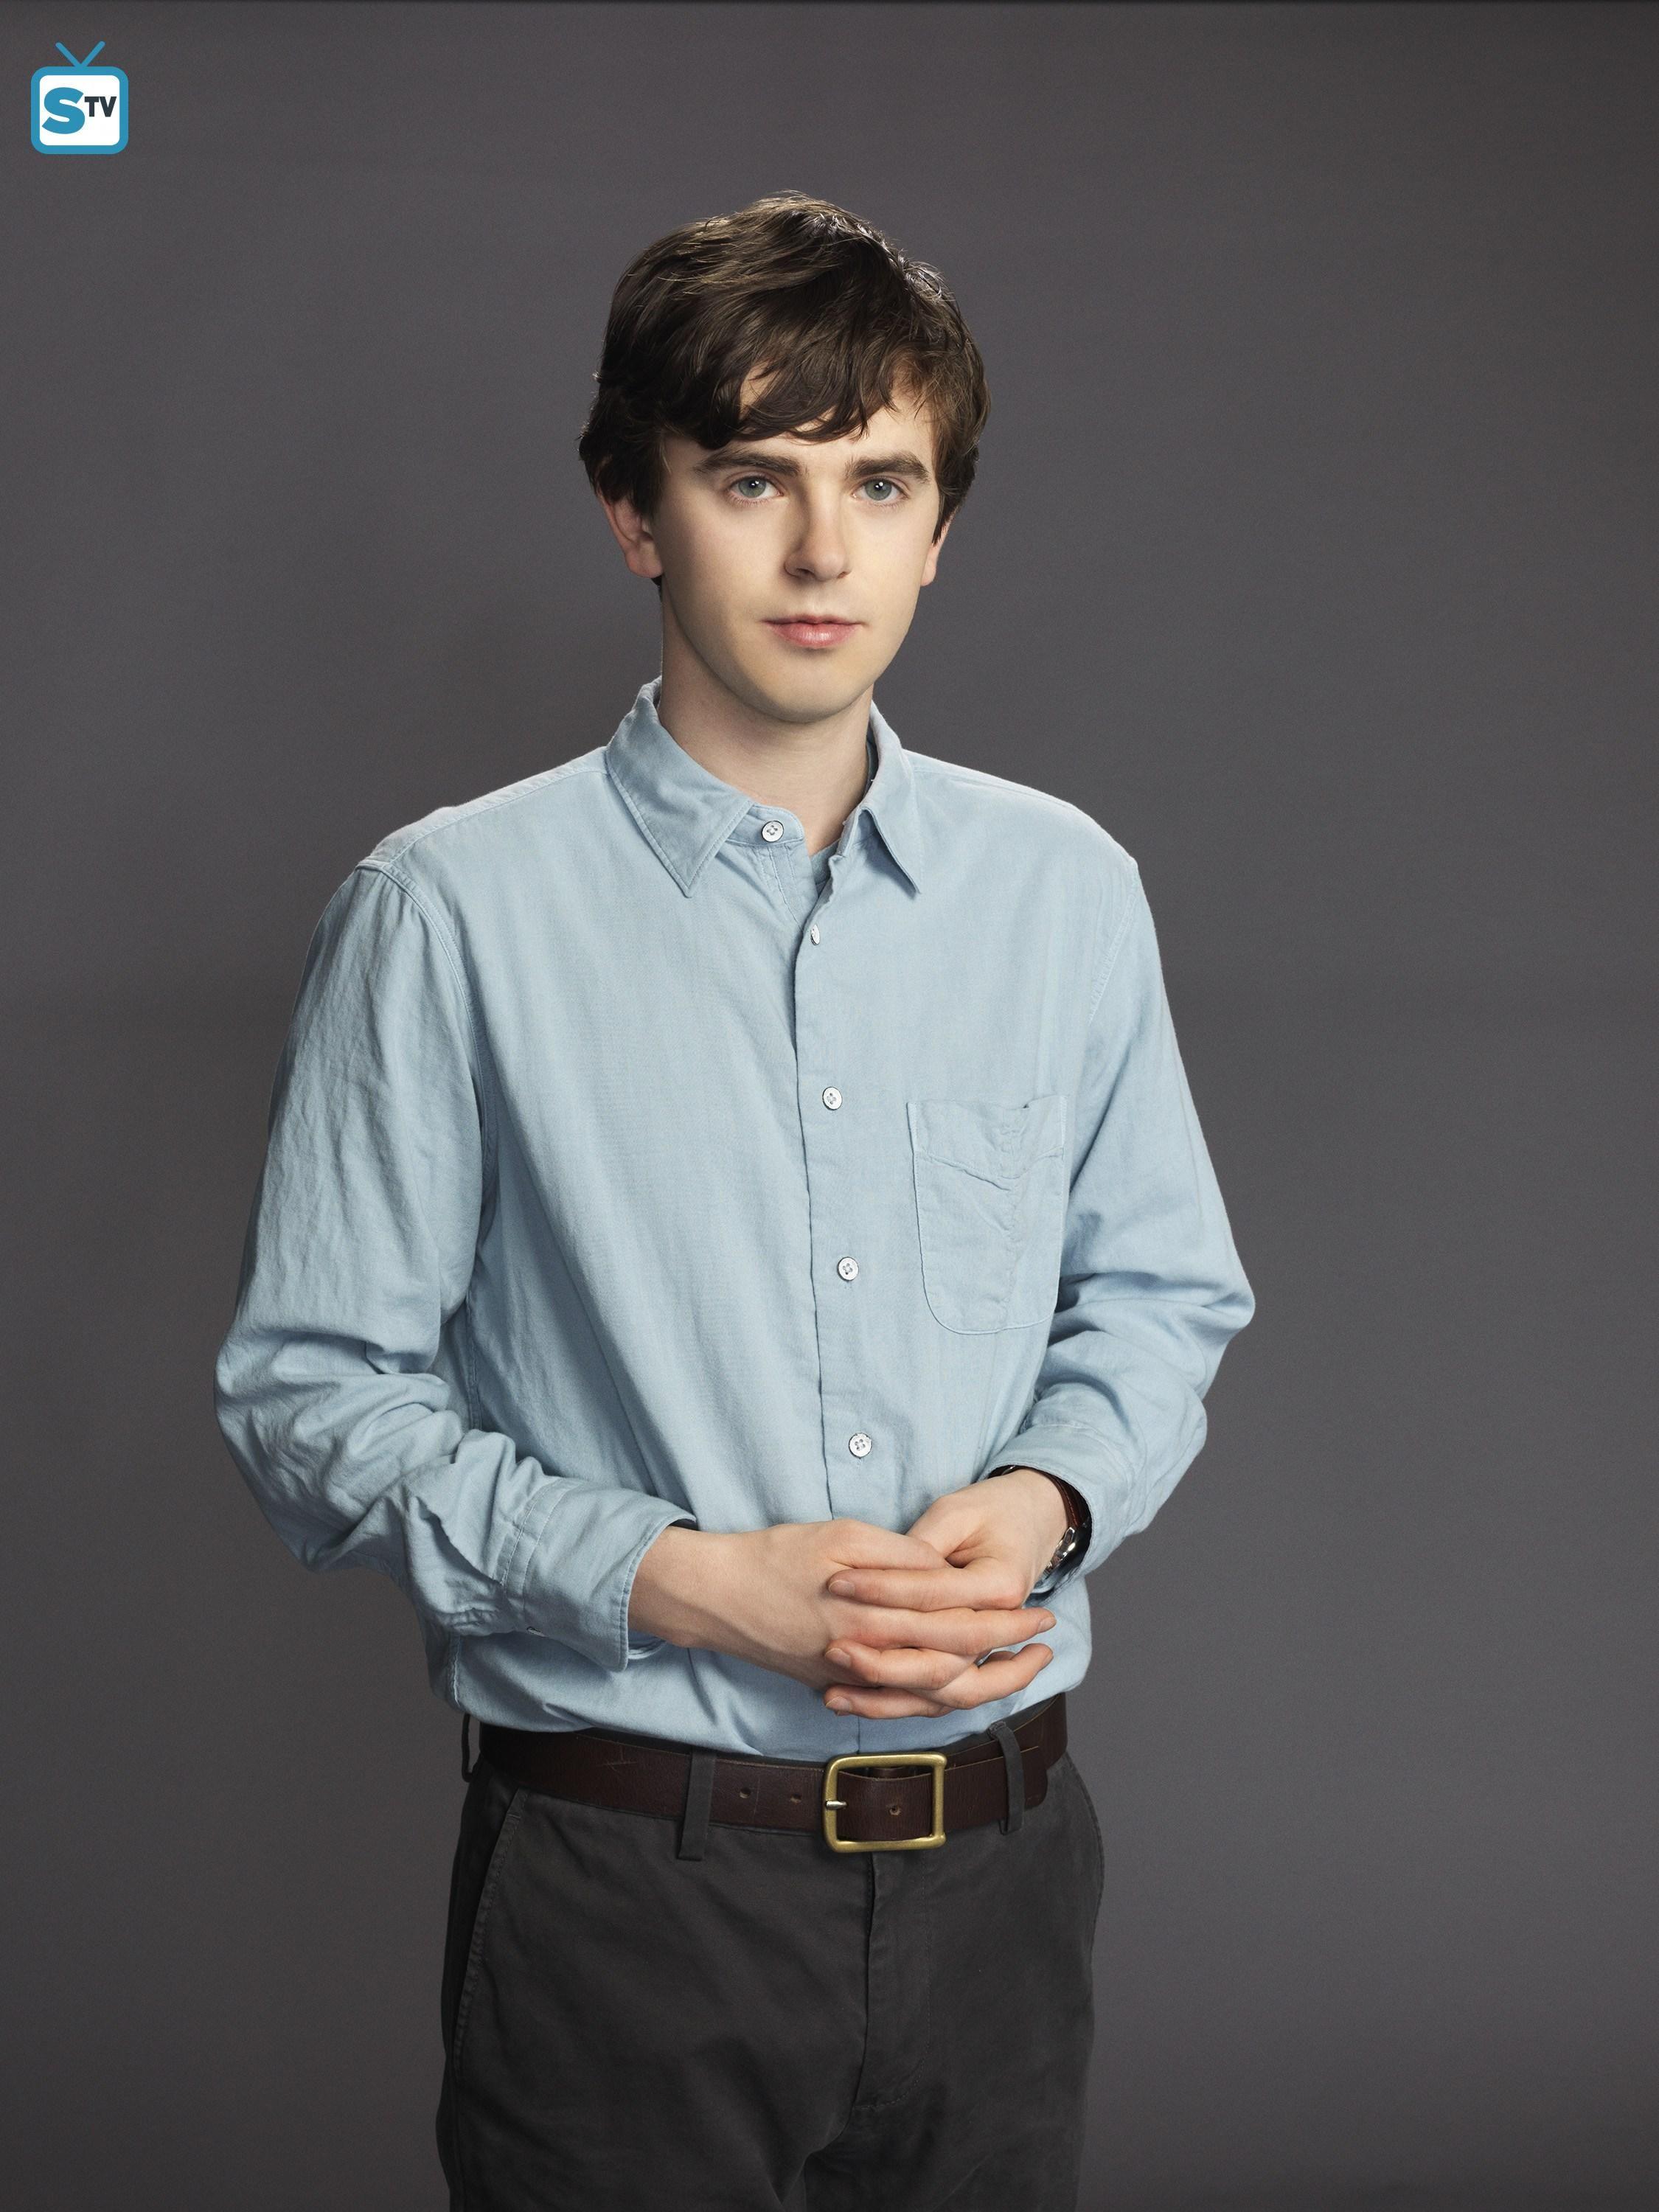 The Good Doctor image 'The Good Doctor' Character Portrait